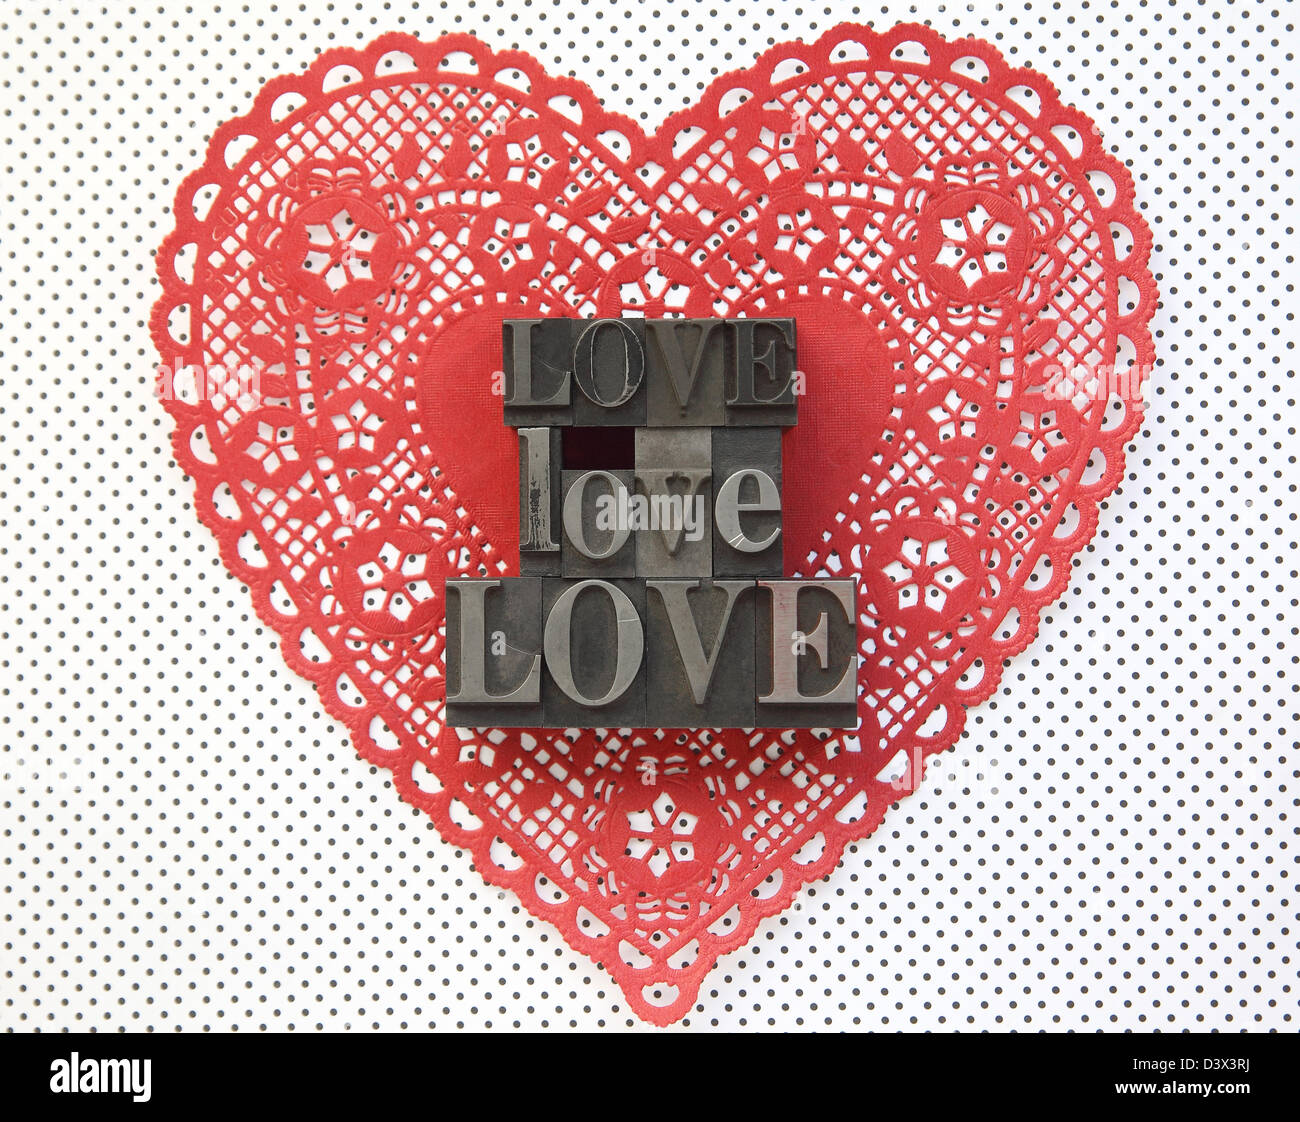 the word 'love' in old metal type on a Valentine doily against a polka dot background Stock Photo